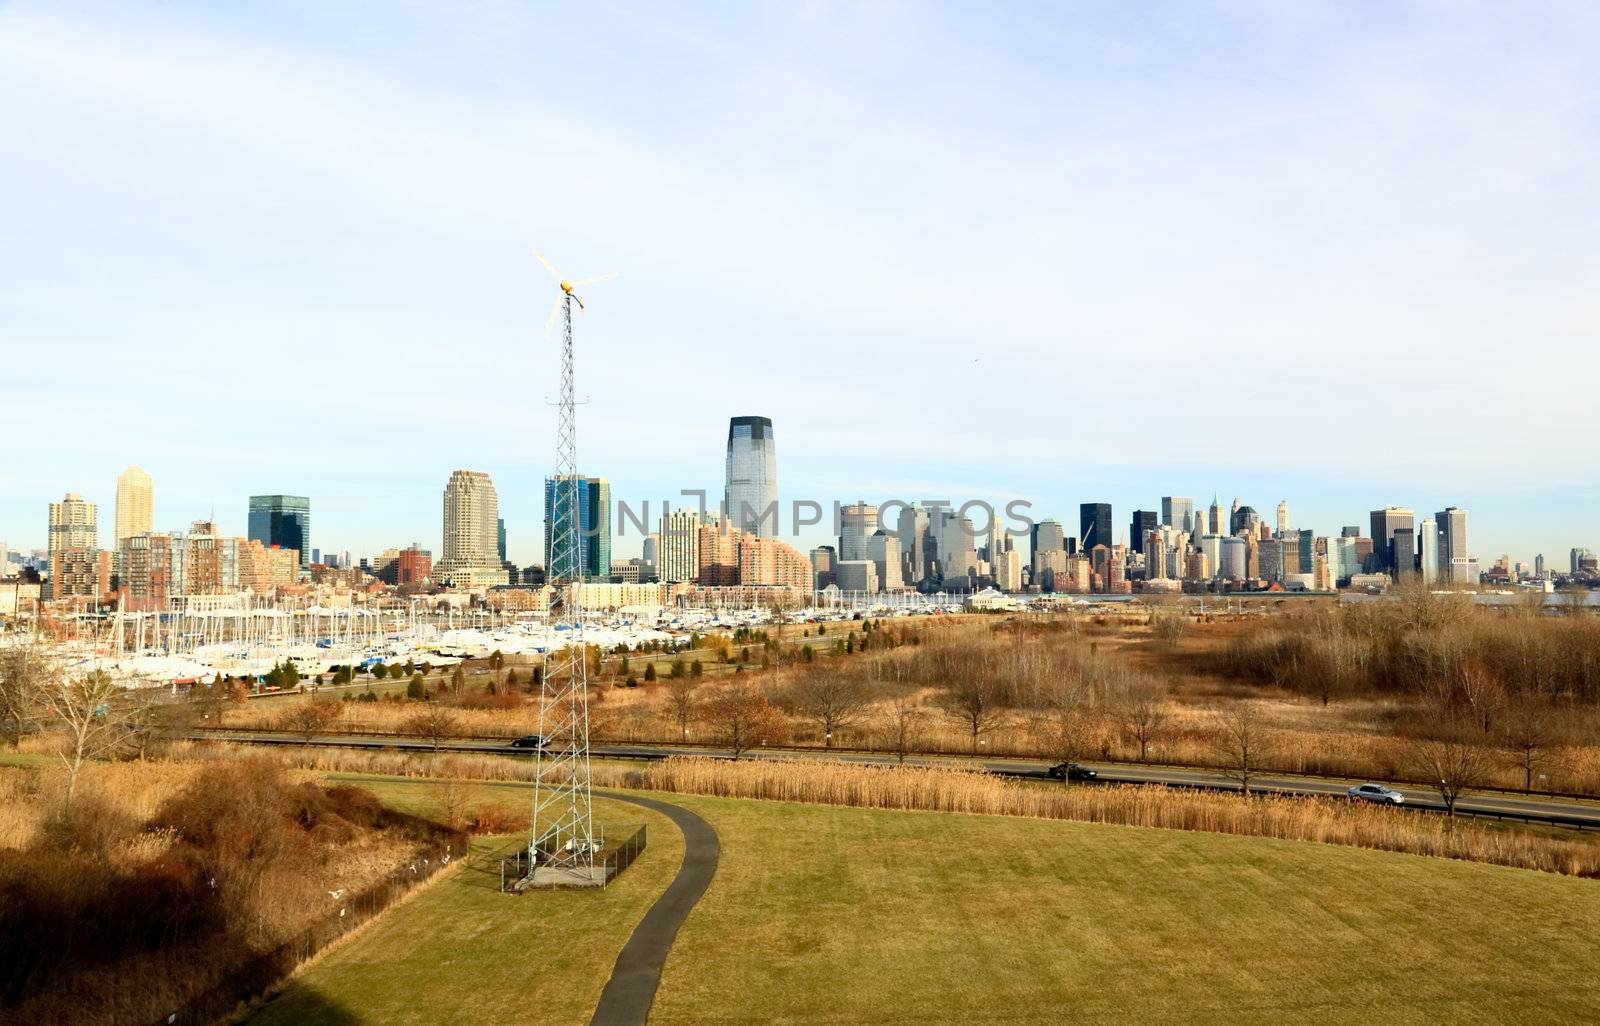 The Lower-Manhattan and the Liberty Park in a winter day